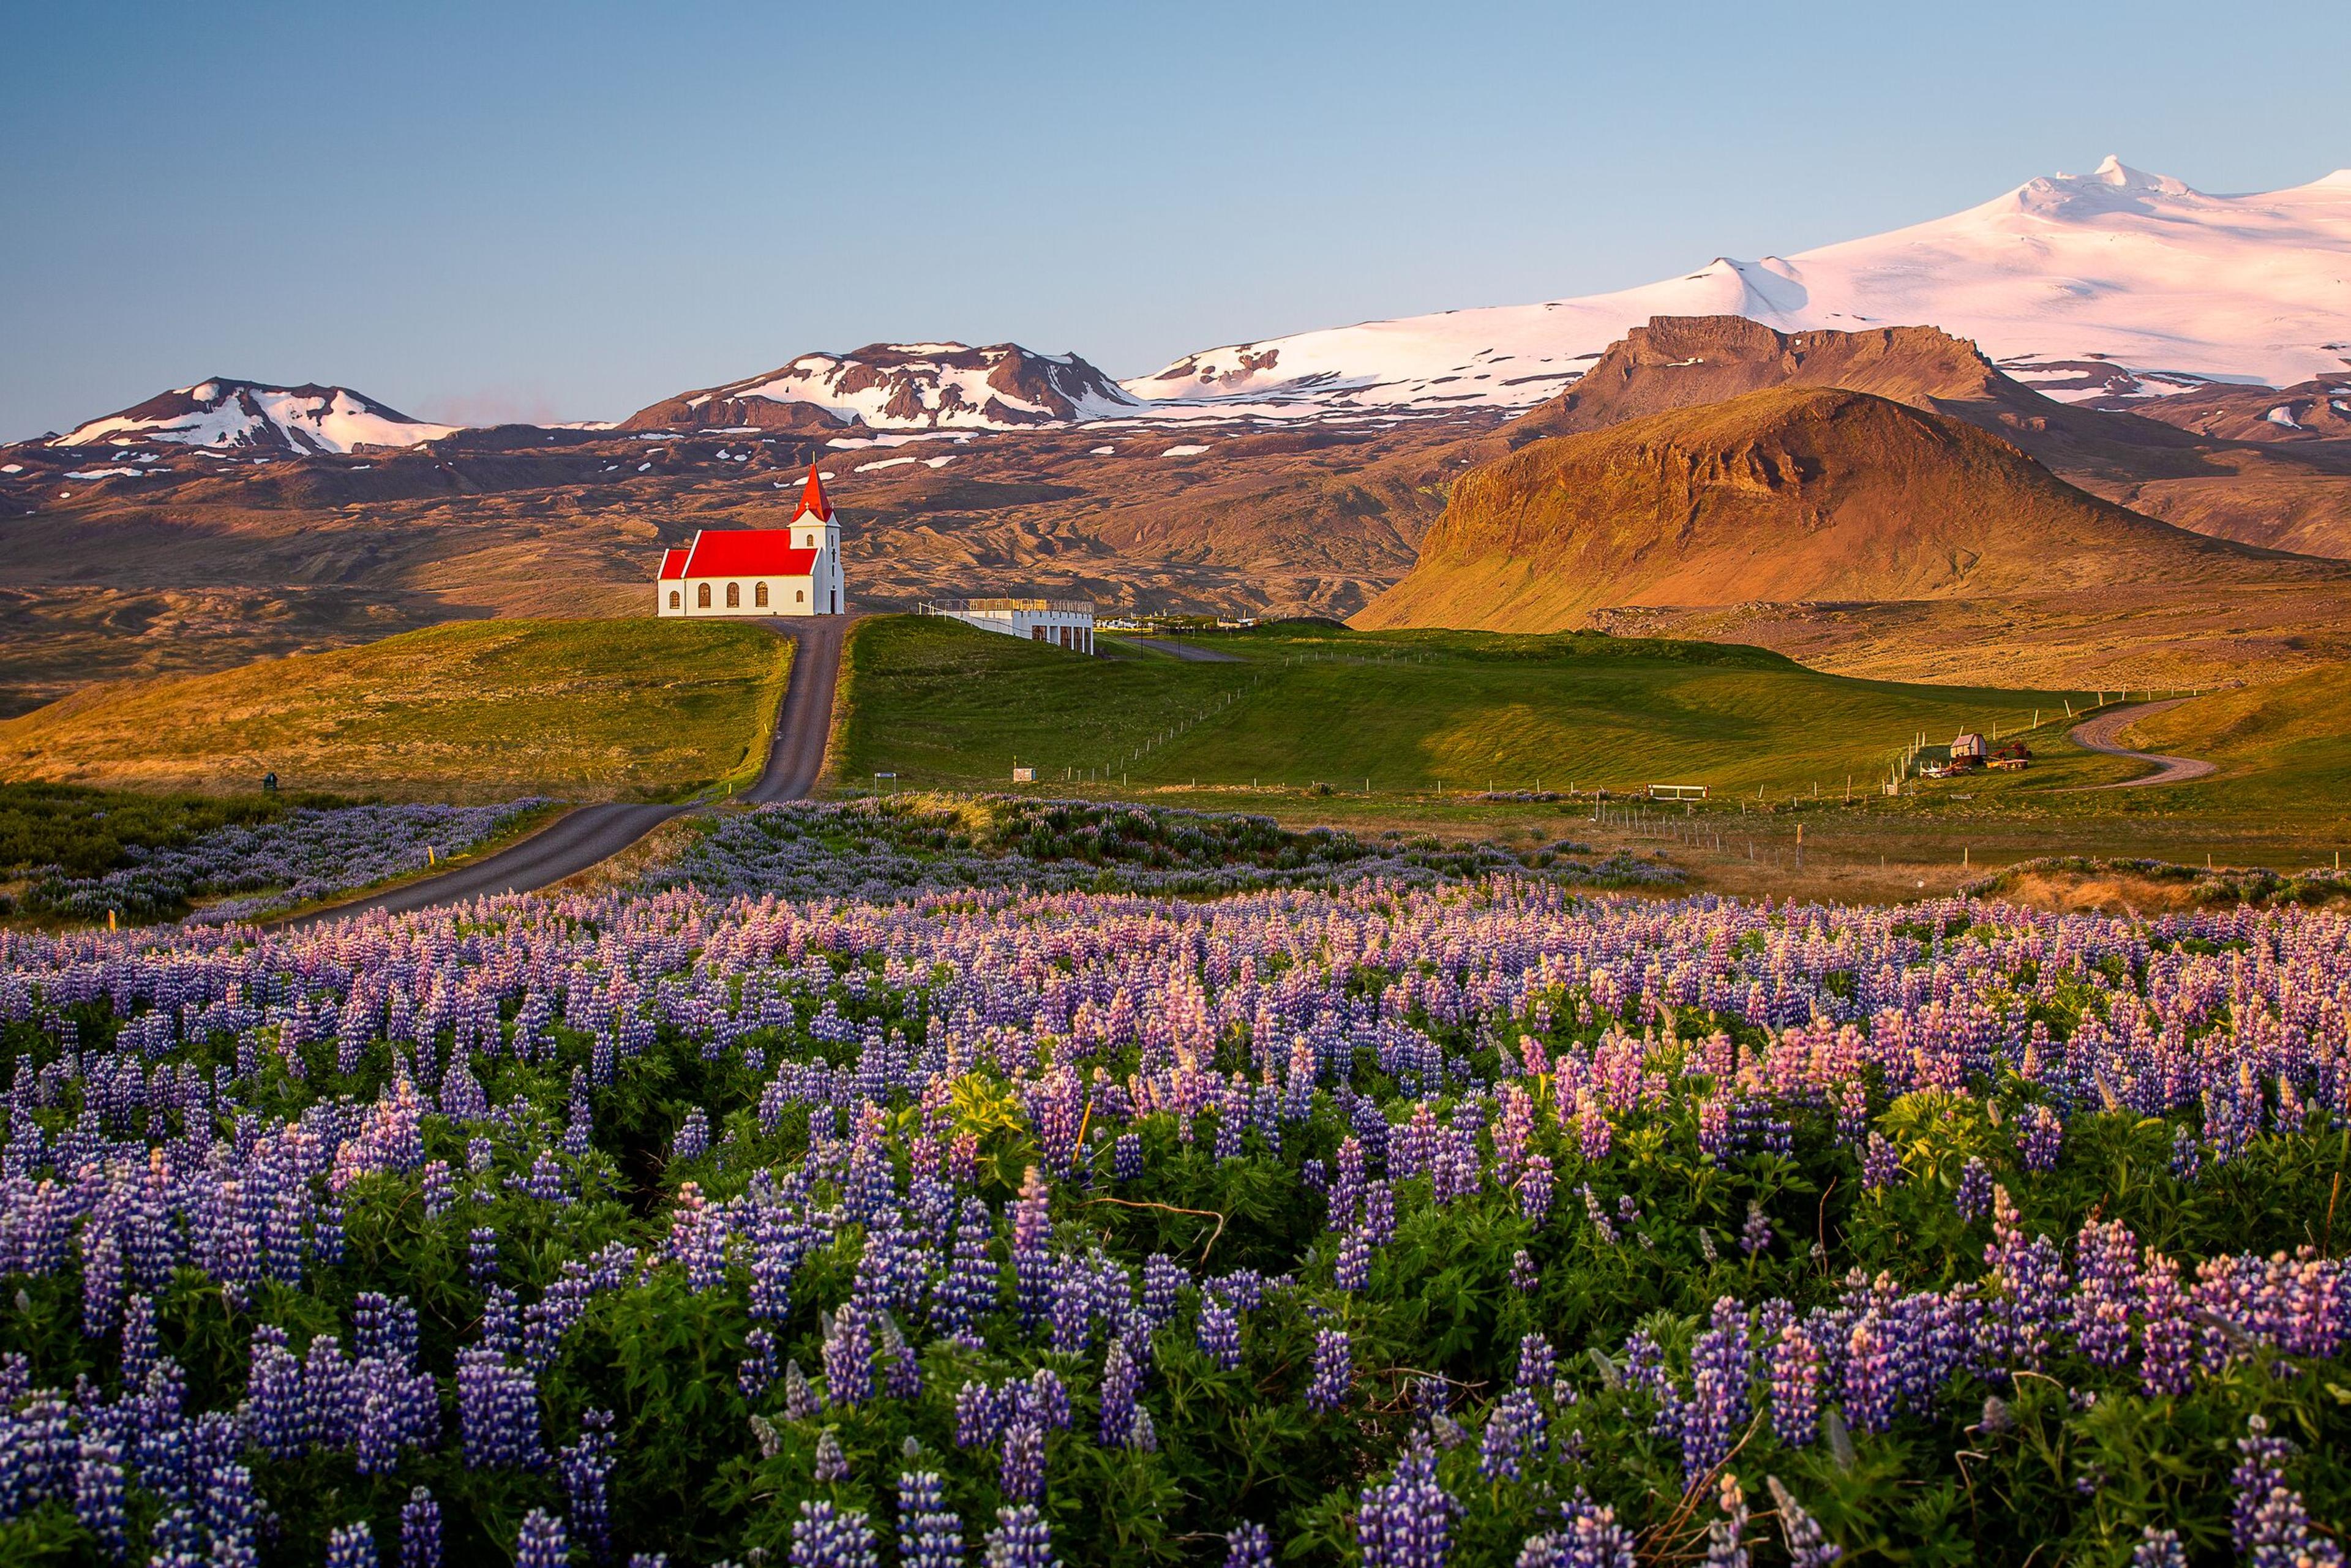 Red-roofed church perched on a small hill, enveloped by a sea of purple lupins, with a glacier-capped volcano rising majestically in the background.